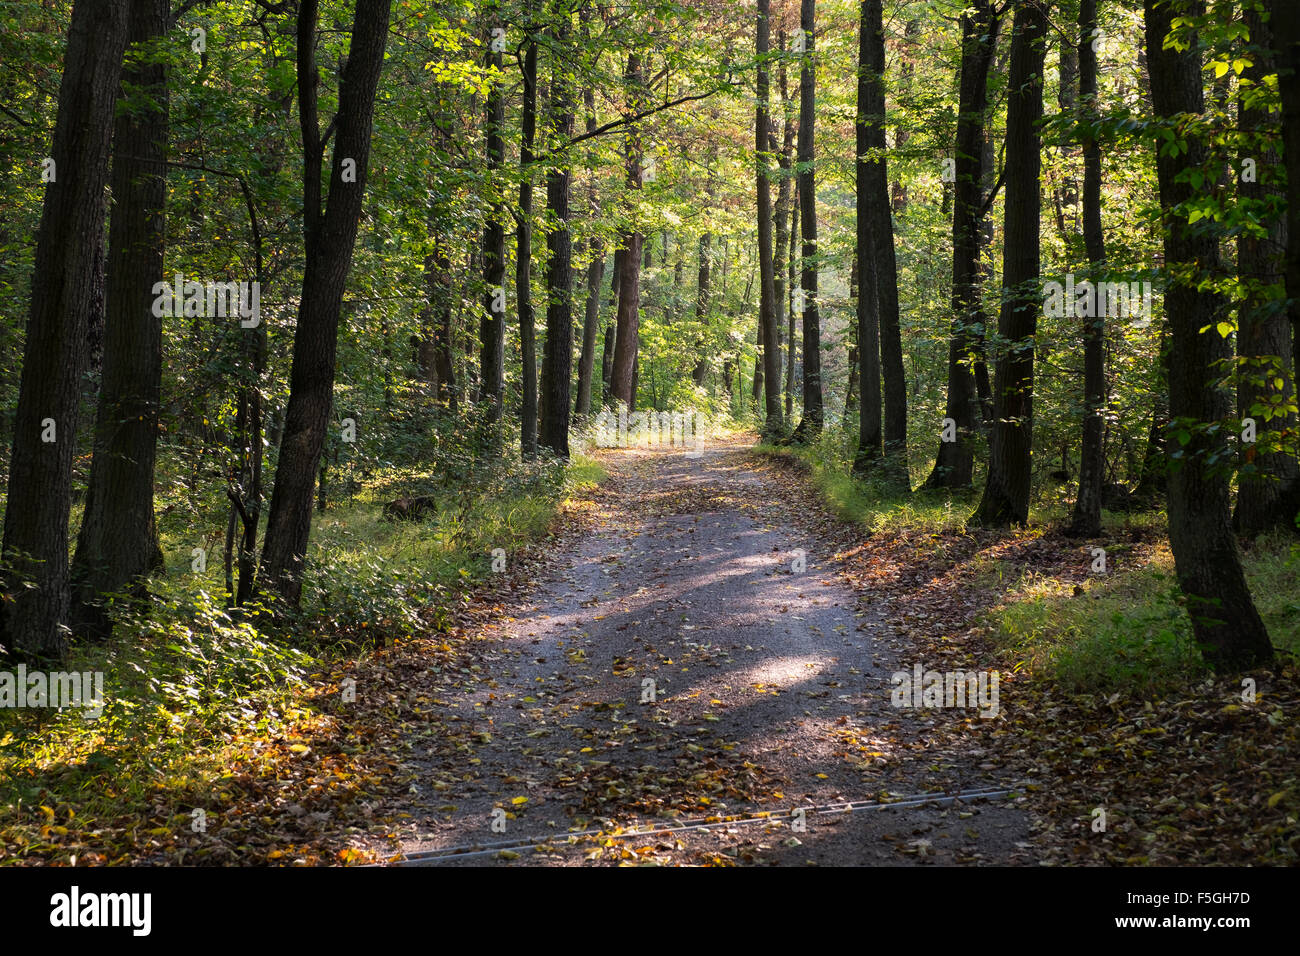 Forest road in the Grainberg-Kalbenstein nature reserve, Lower Franconia, Franconia, Bavaria, Germany Stock Photo